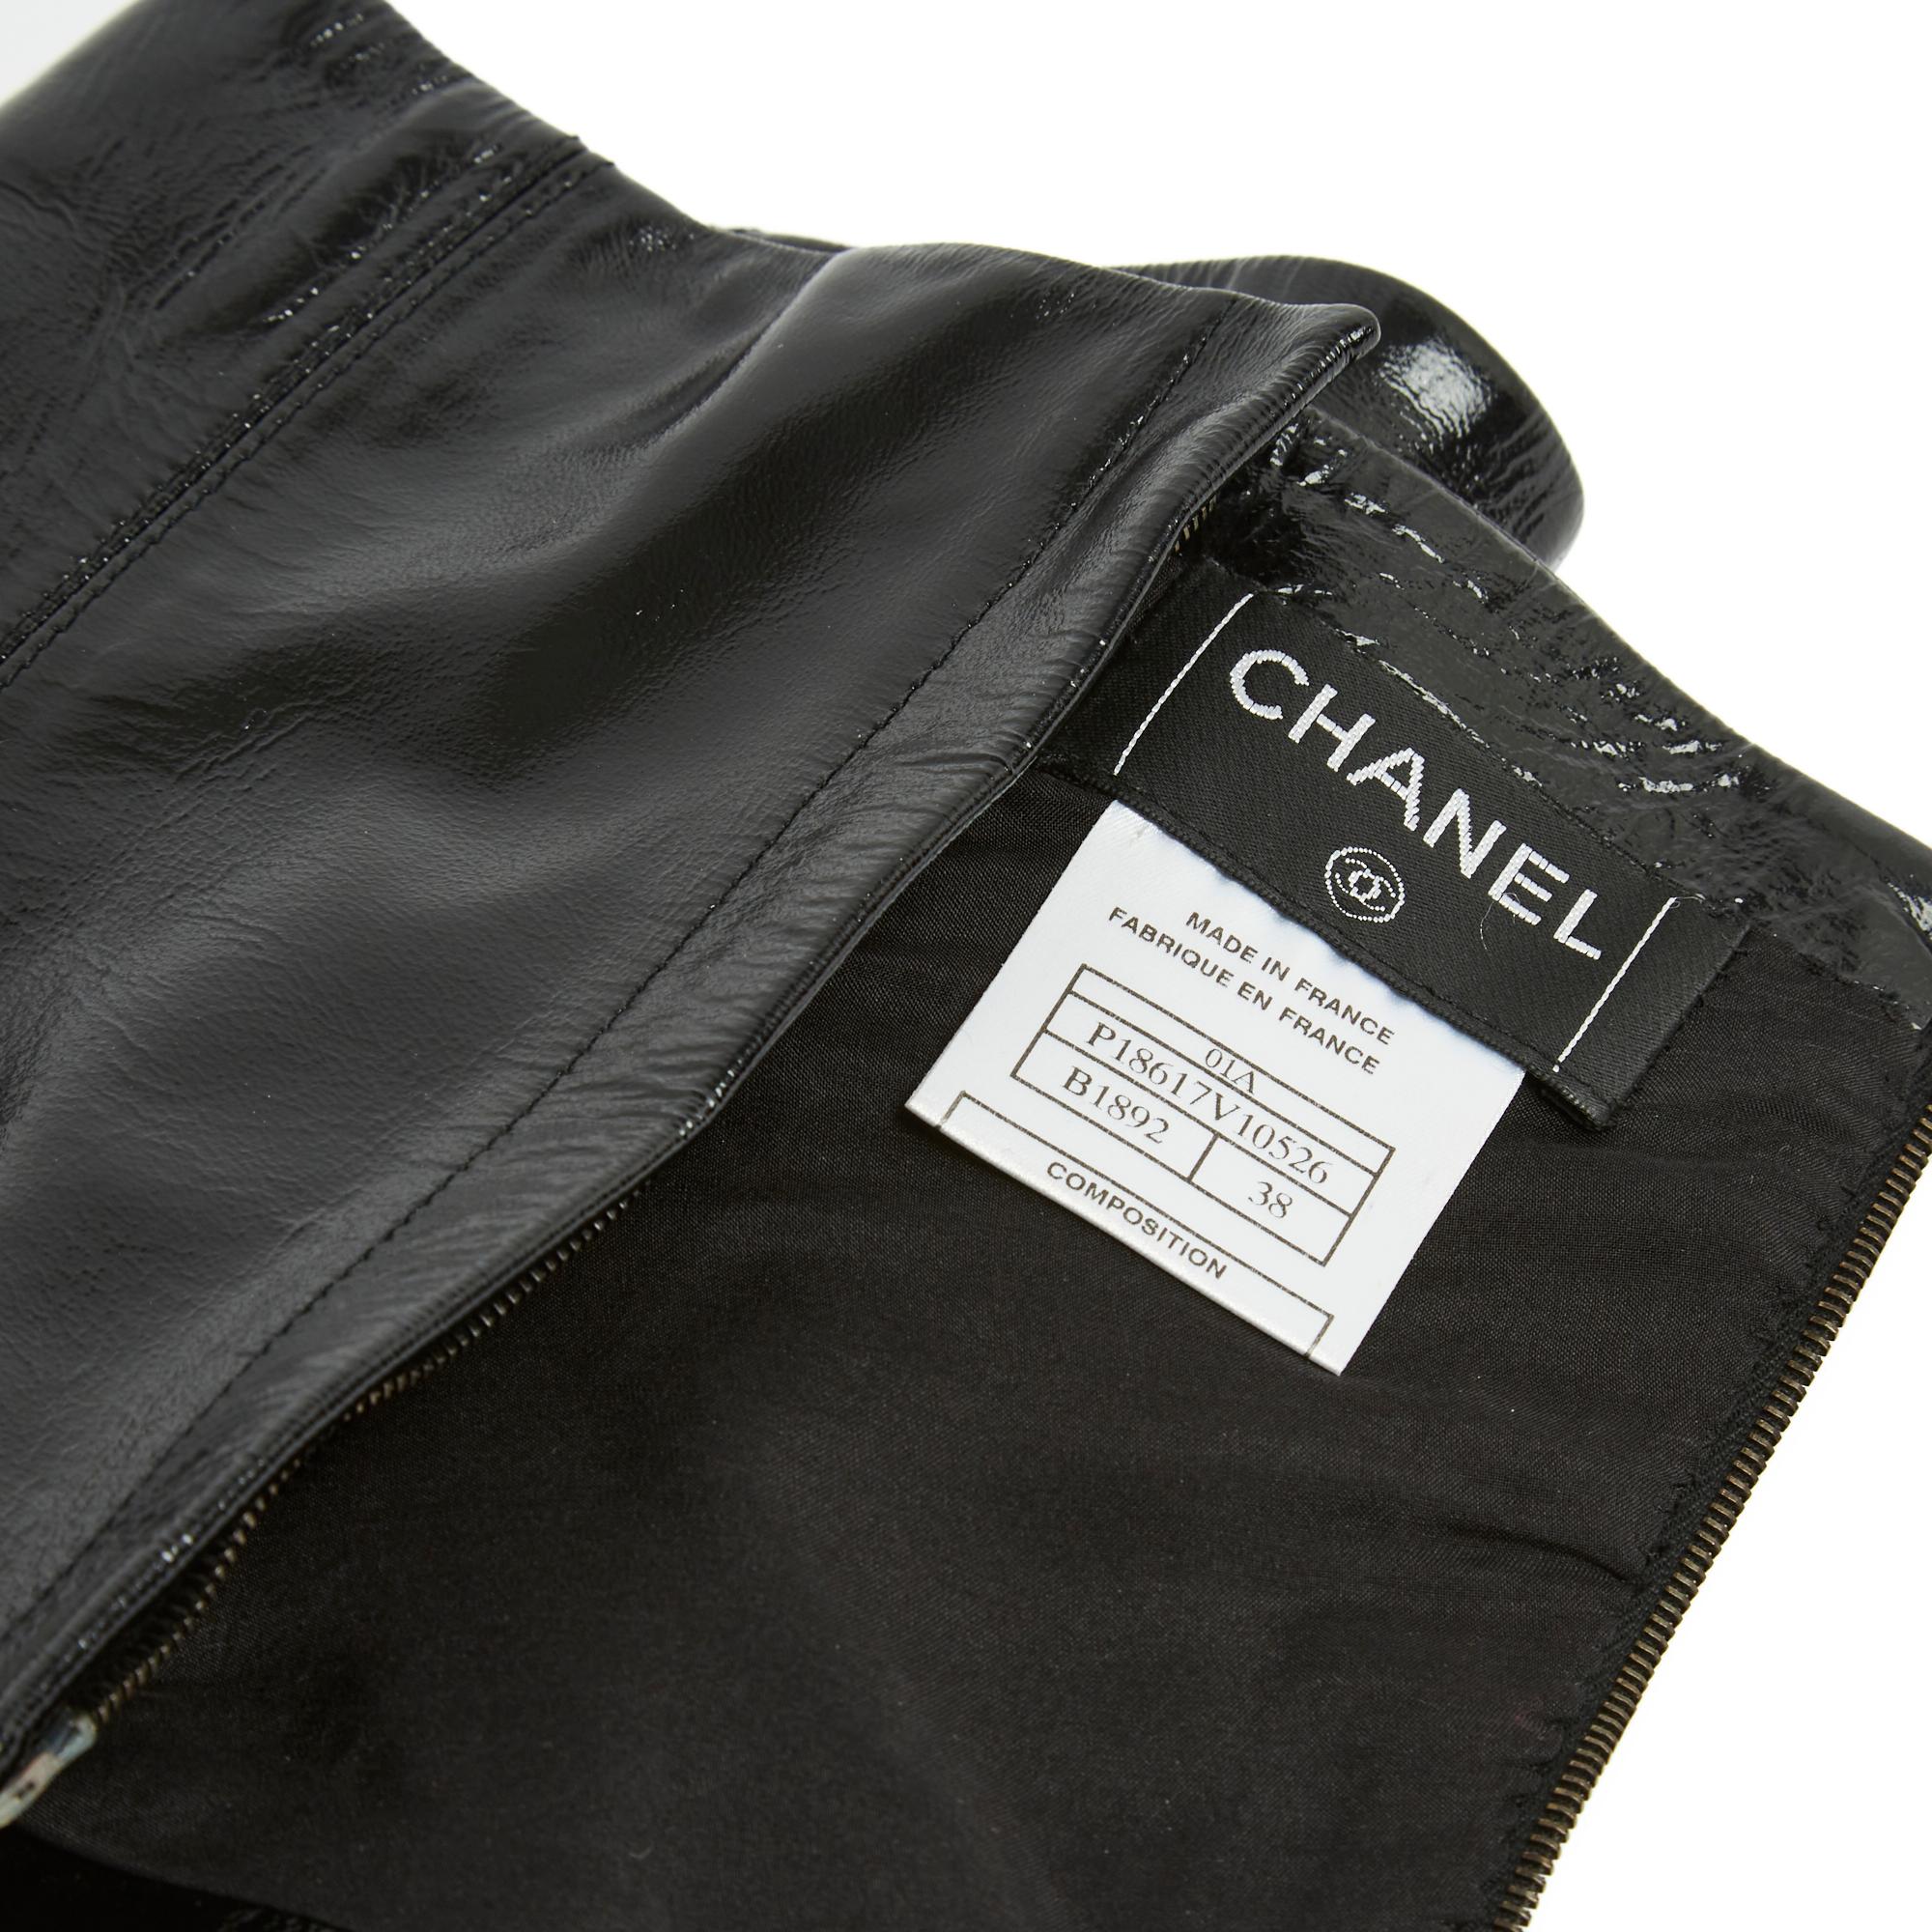 Women's or Men's 01A Chanel Patent Black FR34/36 High Waist For Sale